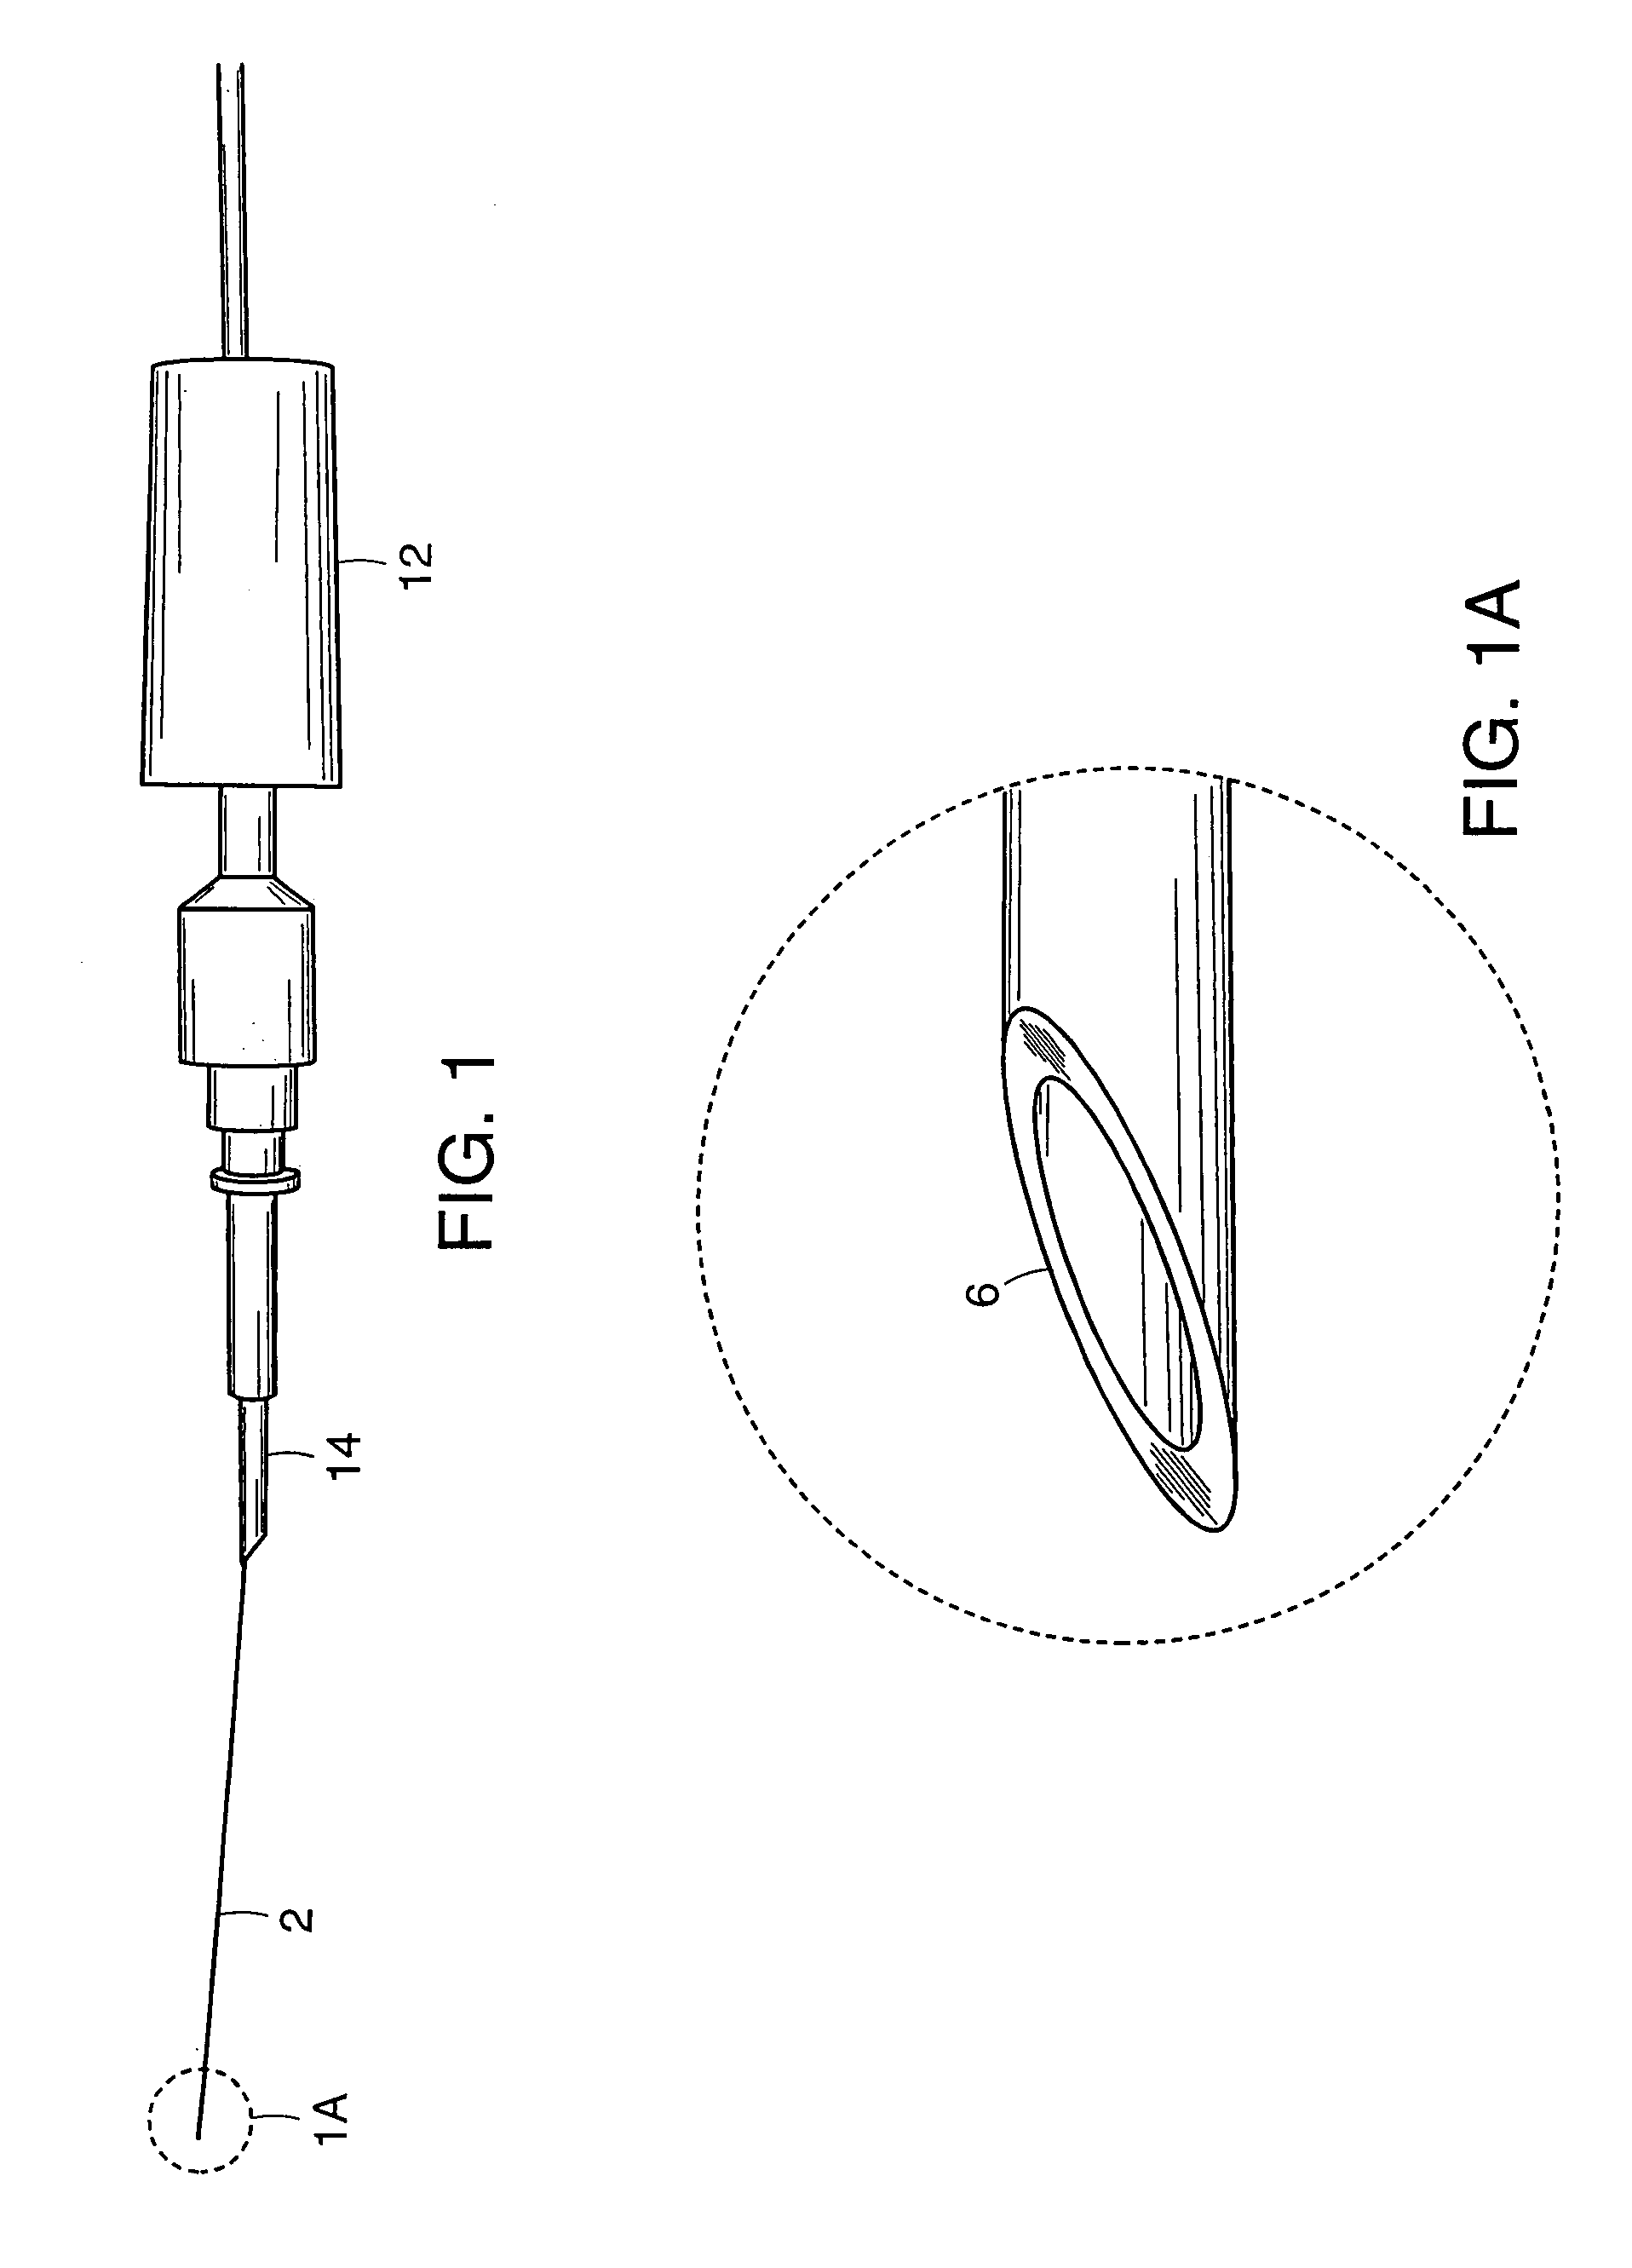 Device and method for manual retinal vein catheterization